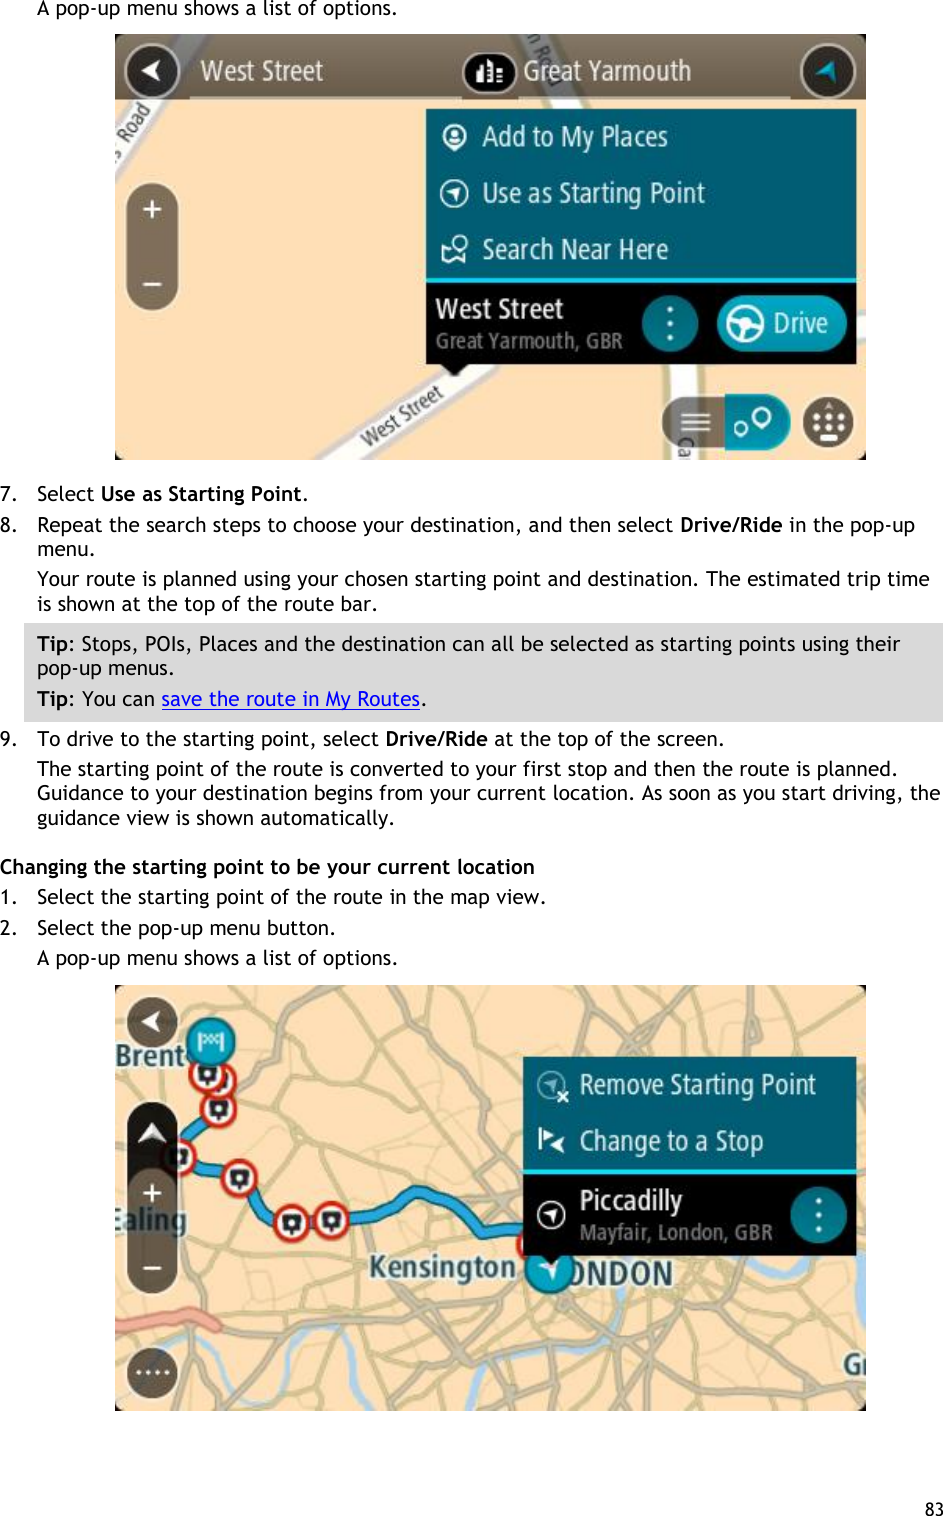  83  A pop-up menu shows a list of options.  7. Select Use as Starting Point. 8. Repeat the search steps to choose your destination, and then select Drive/Ride in the pop-up menu. Your route is planned using your chosen starting point and destination. The estimated trip time is shown at the top of the route bar. Tip: Stops, POIs, Places and the destination can all be selected as starting points using their pop-up menus. Tip: You can save the route in My Routes. 9. To drive to the starting point, select Drive/Ride at the top of the screen. The starting point of the route is converted to your first stop and then the route is planned. Guidance to your destination begins from your current location. As soon as you start driving, the guidance view is shown automatically. Changing the starting point to be your current location 1. Select the starting point of the route in the map view. 2. Select the pop-up menu button. A pop-up menu shows a list of options.    